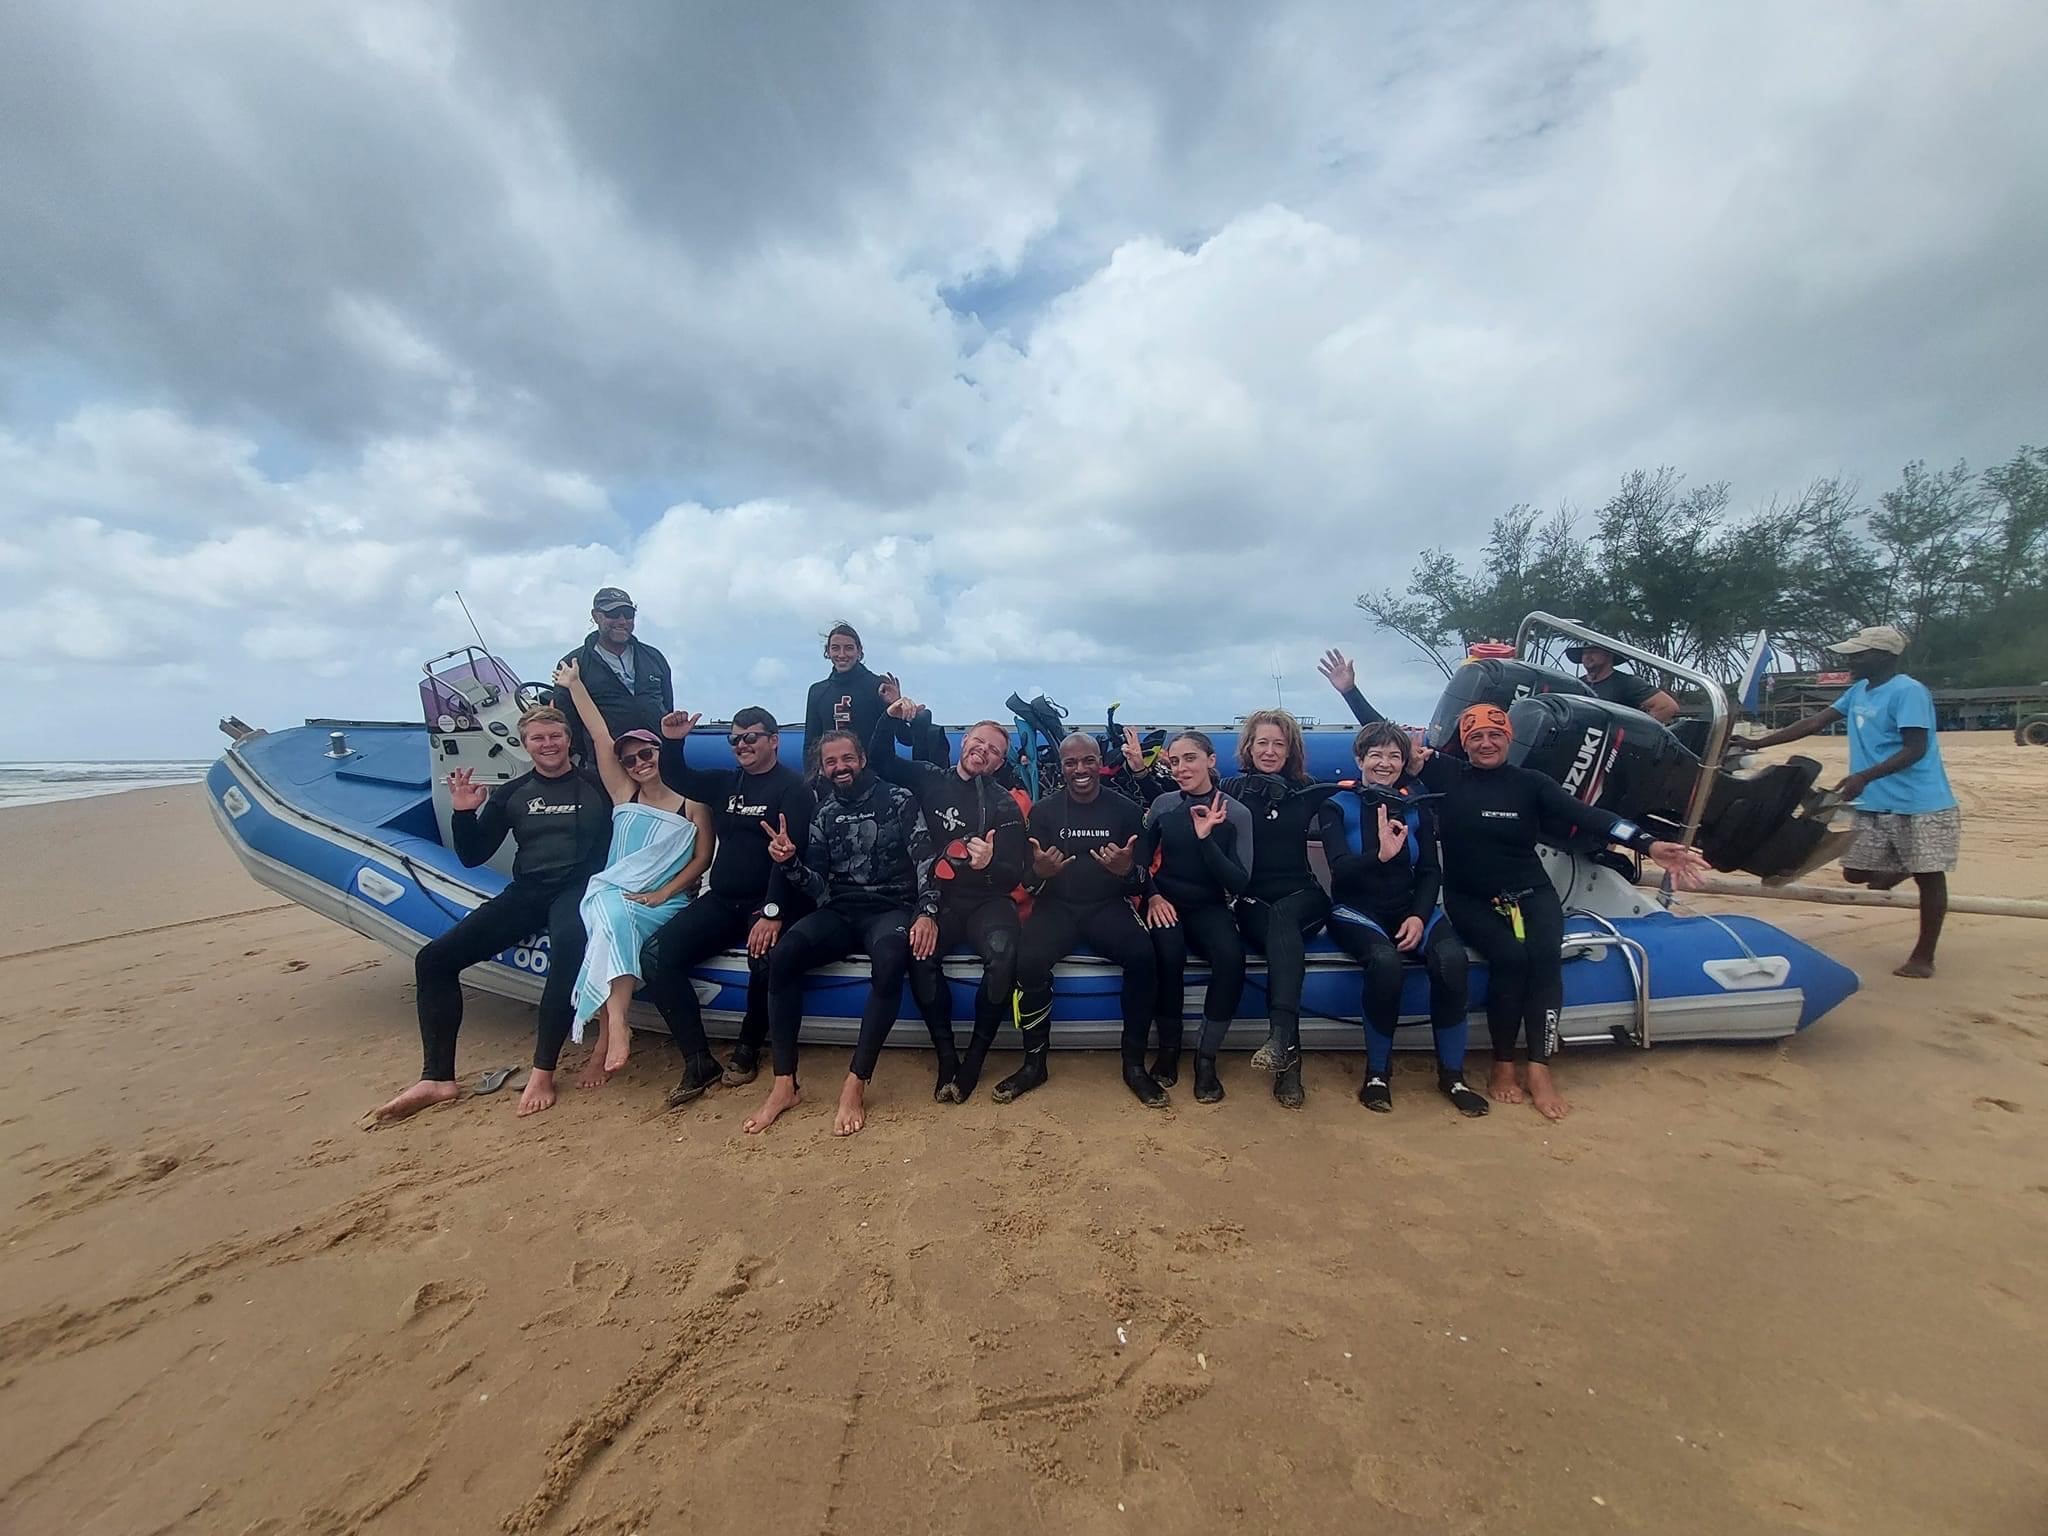 Group photo of divers on the beach sitting on a diving boat. They pose excitedly for the camera after a scuba dive.